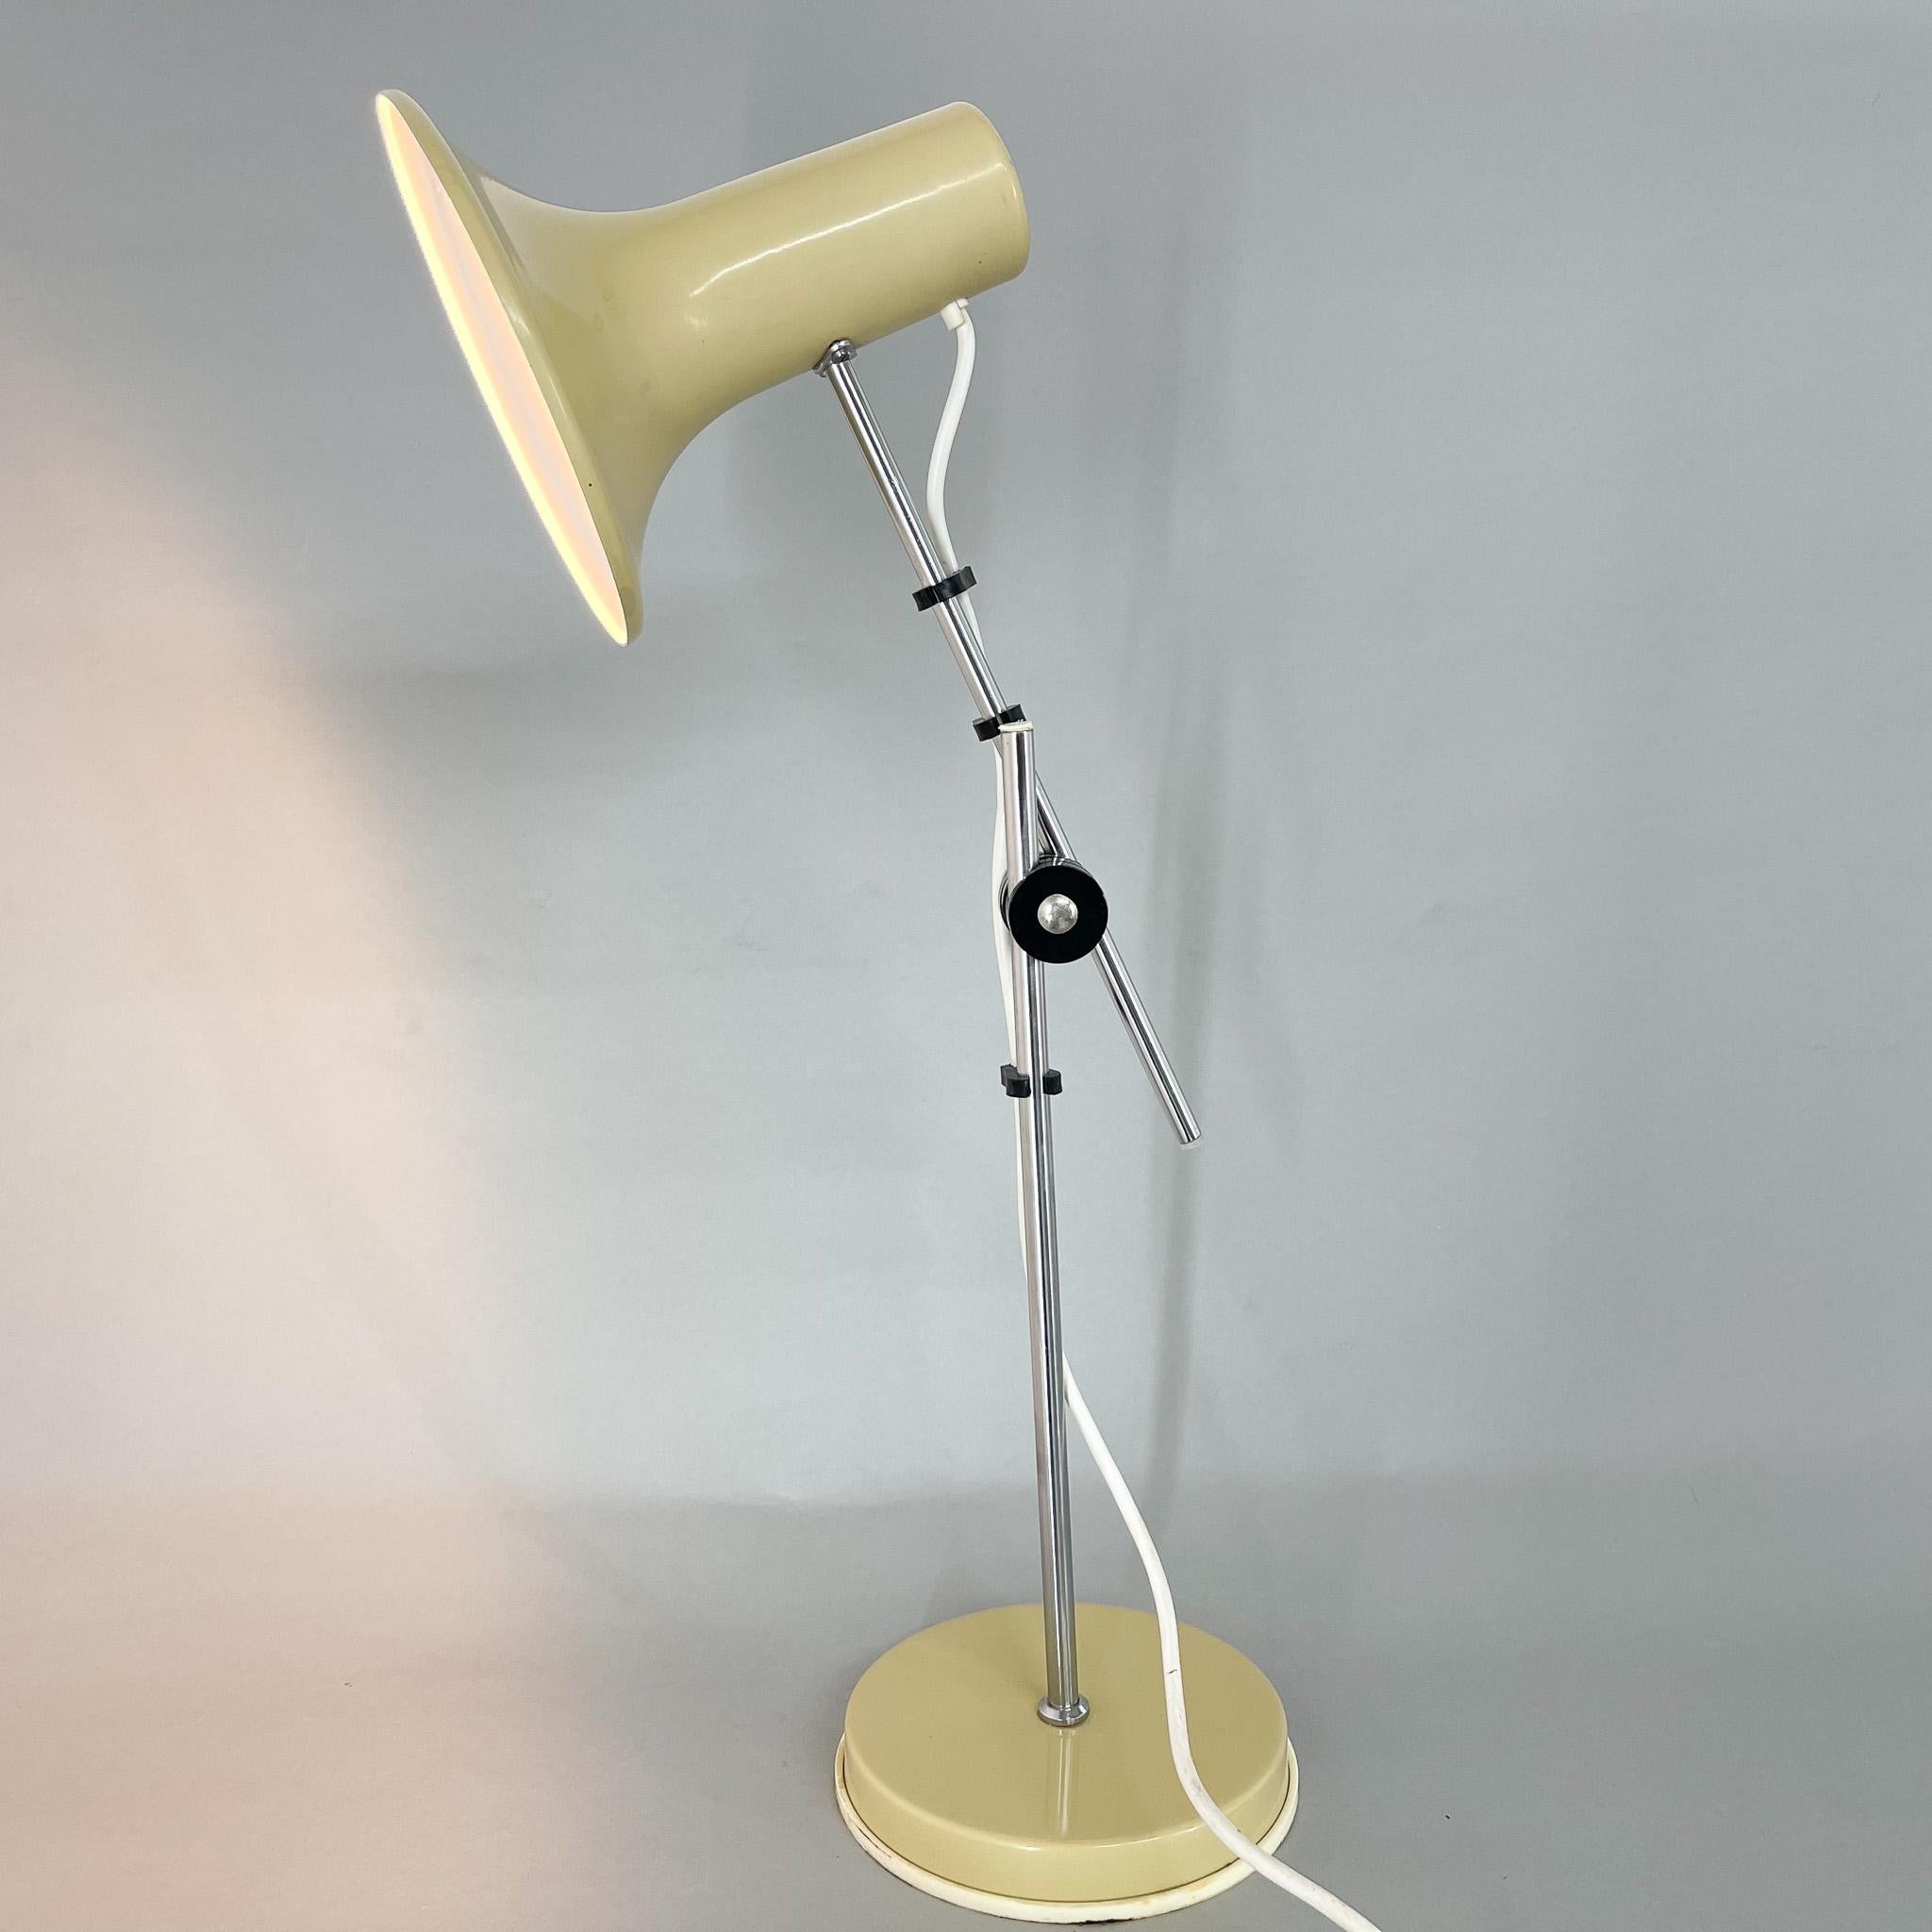 Vintage table lamp with adjustable arm and lampshade. Made of chrome and metal, produced in Hungary (see label).